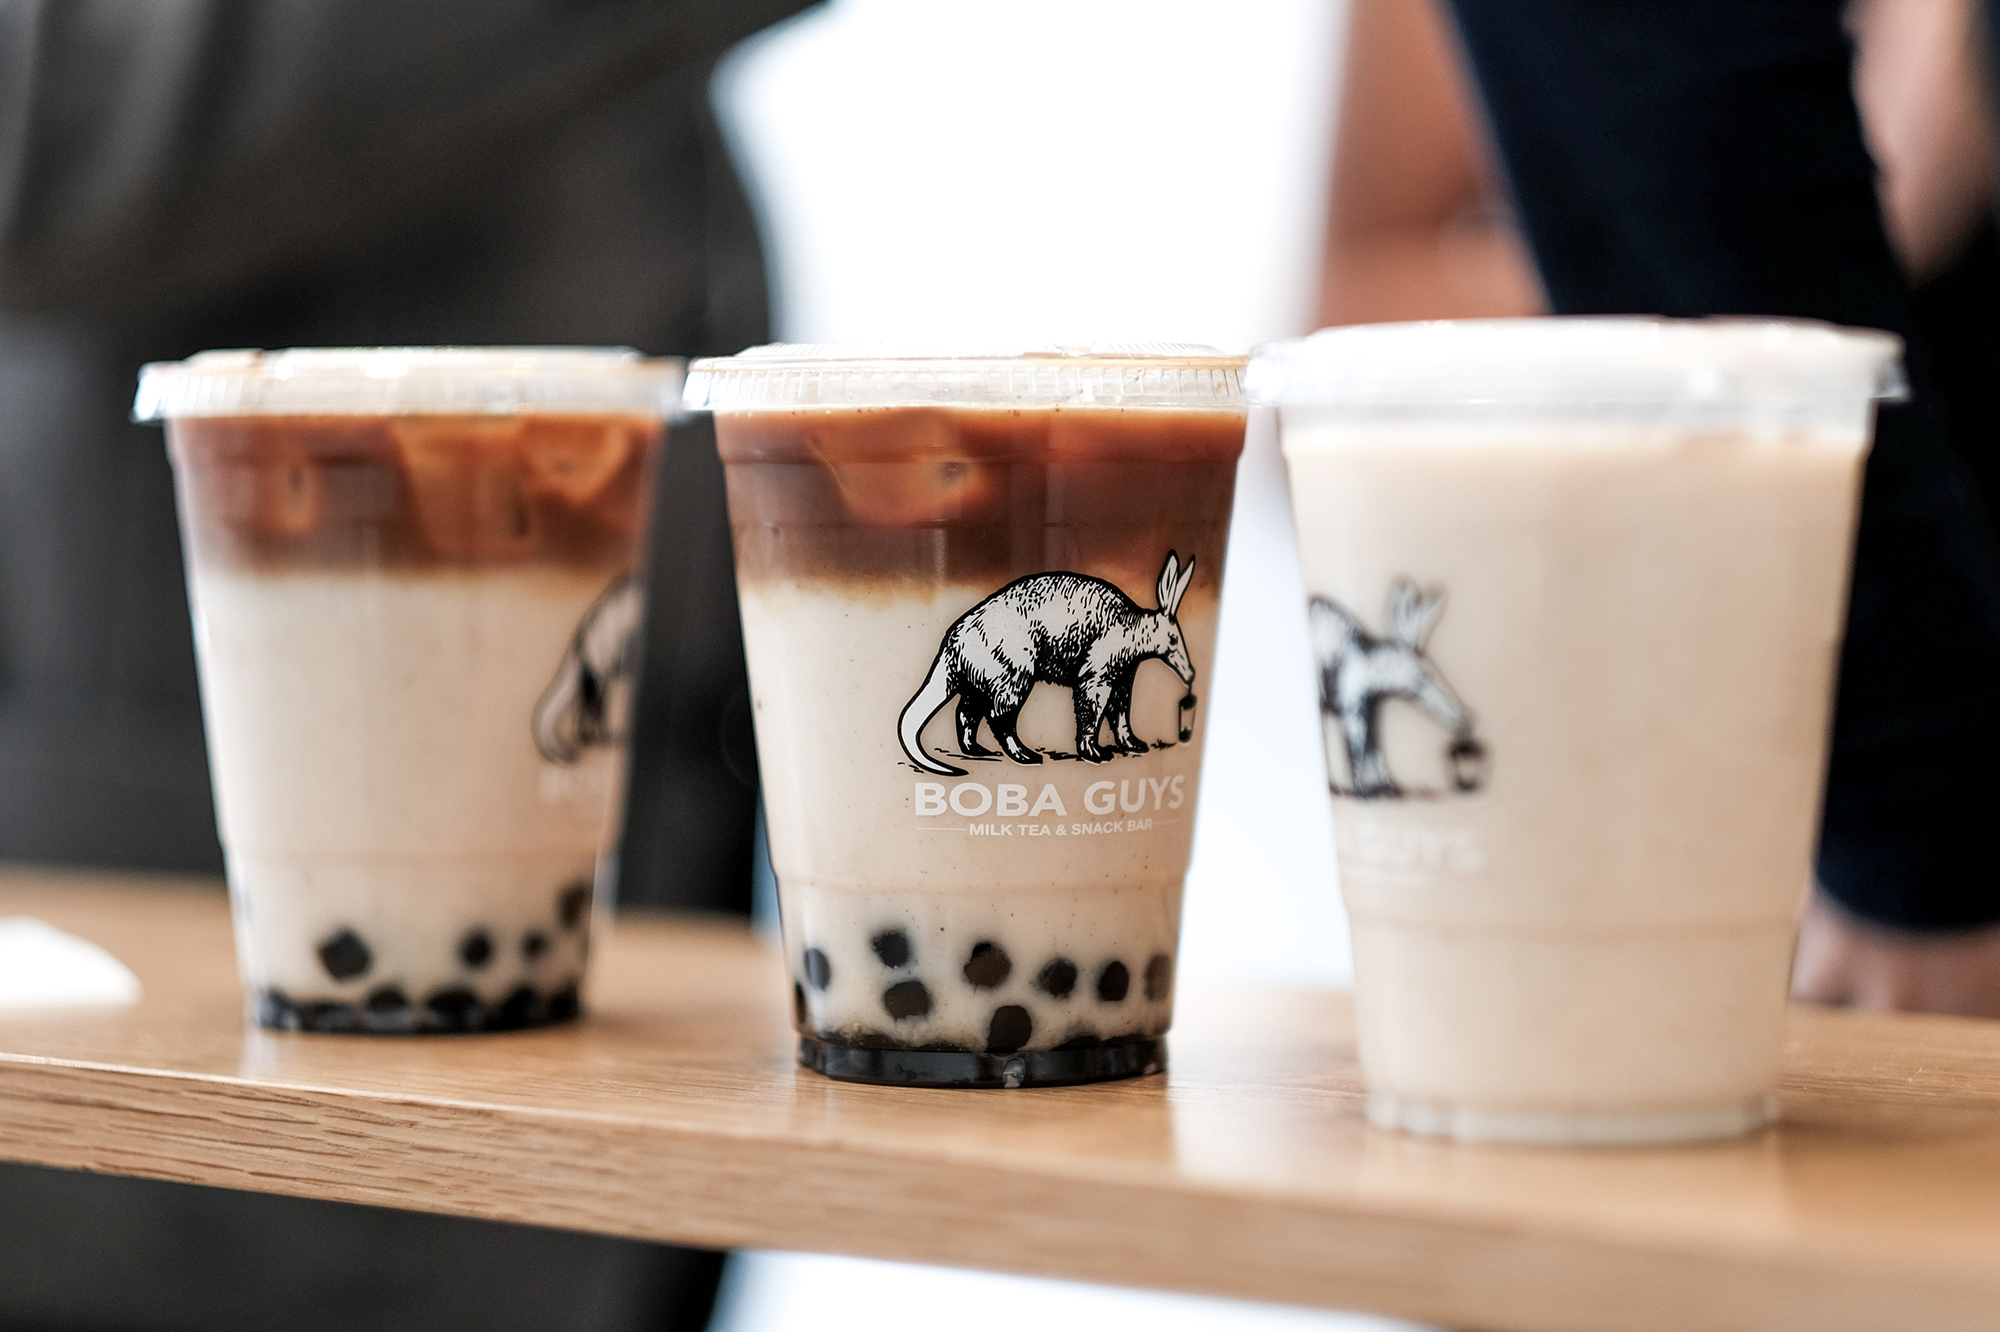 Dirty Horchata from Boba Guys: Boba Guys and its competitors hope revamped offerings will draw in coffee and tea drinkers.